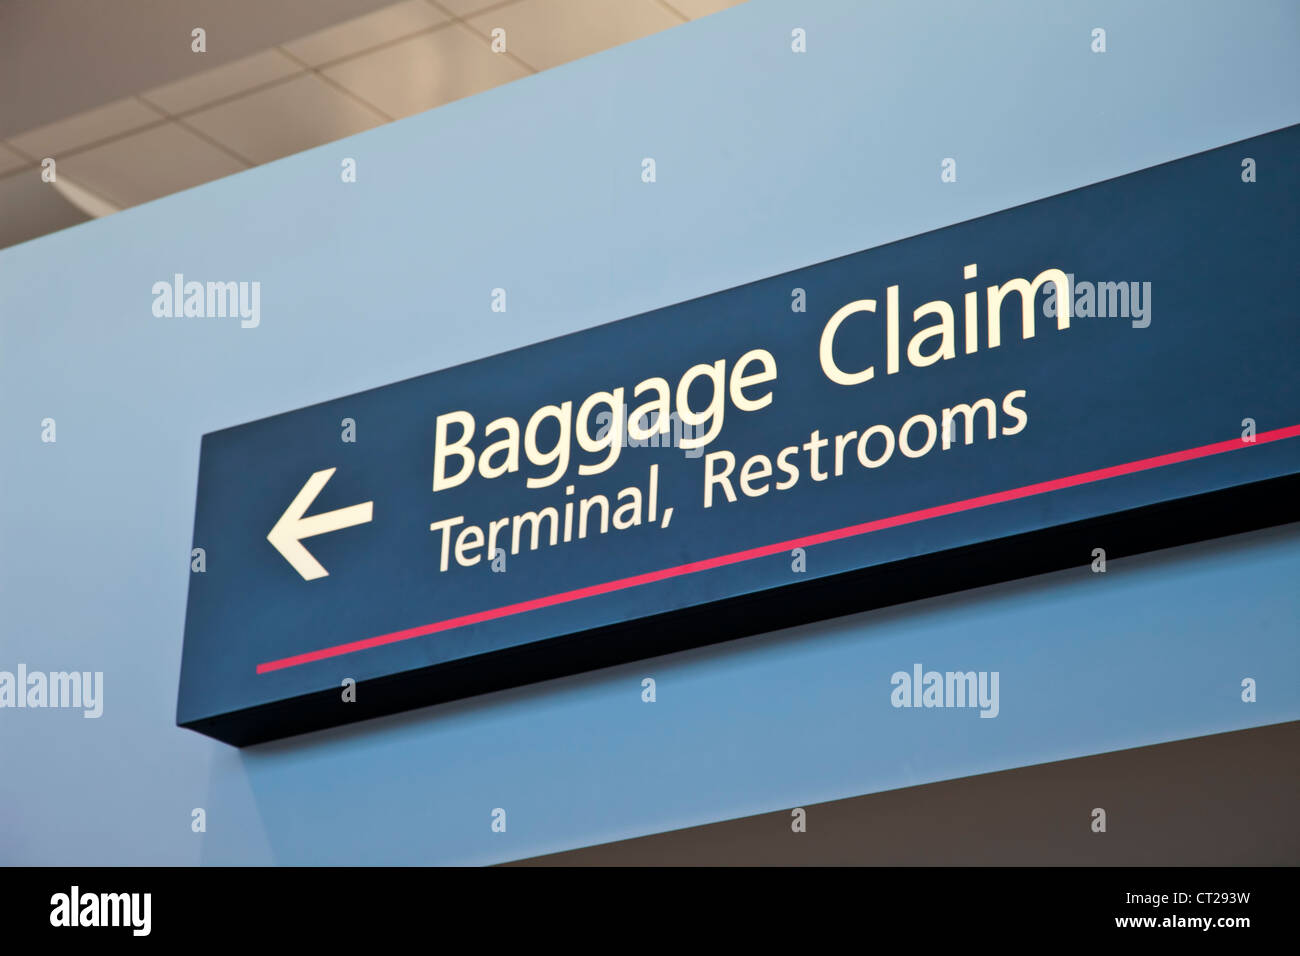 baggage claim, terminal, restrooms - airport sign with arrow Stock Photo